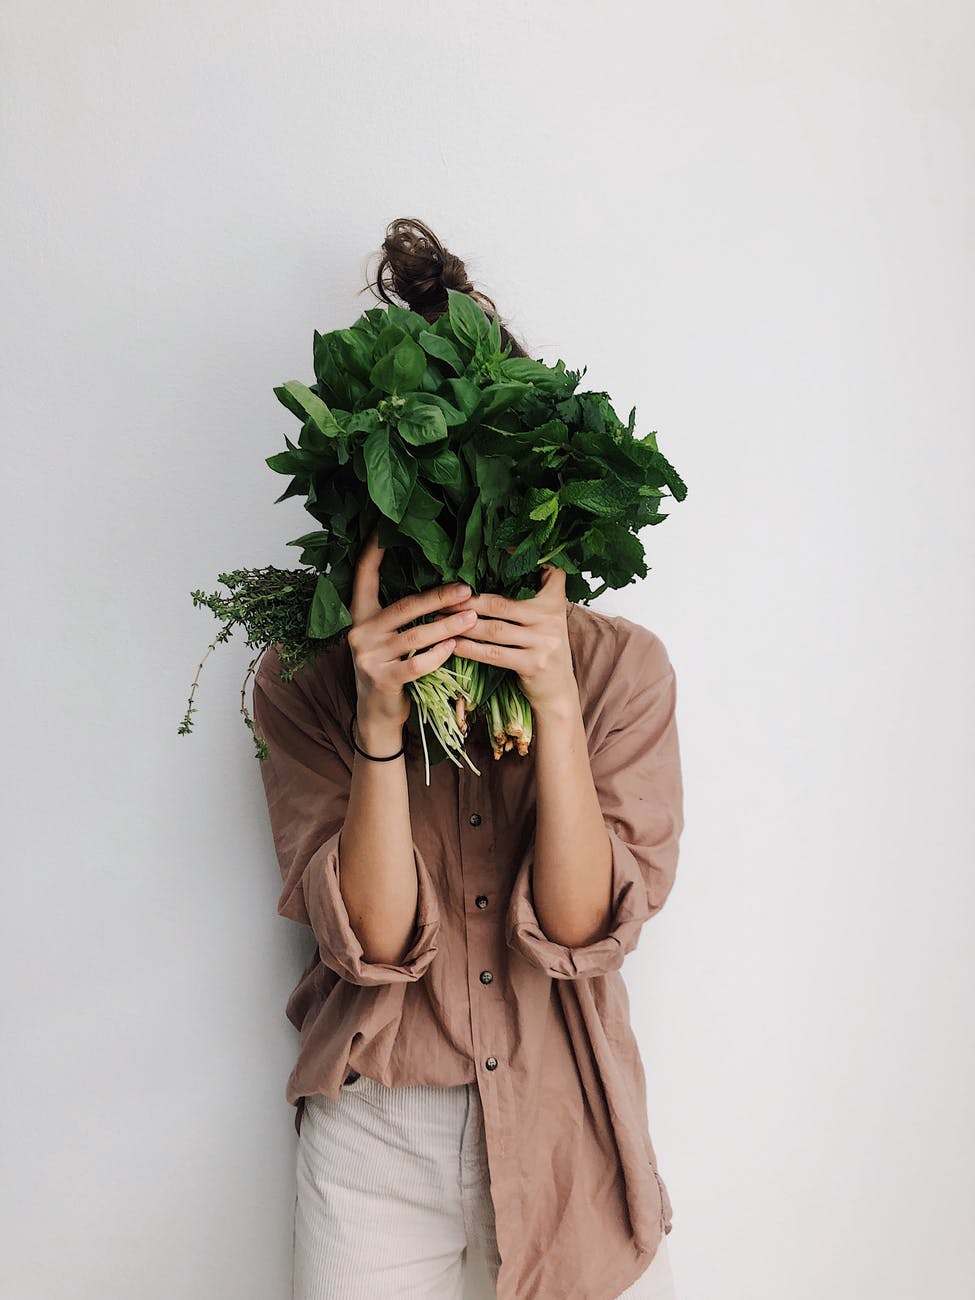 person holding green vegetables